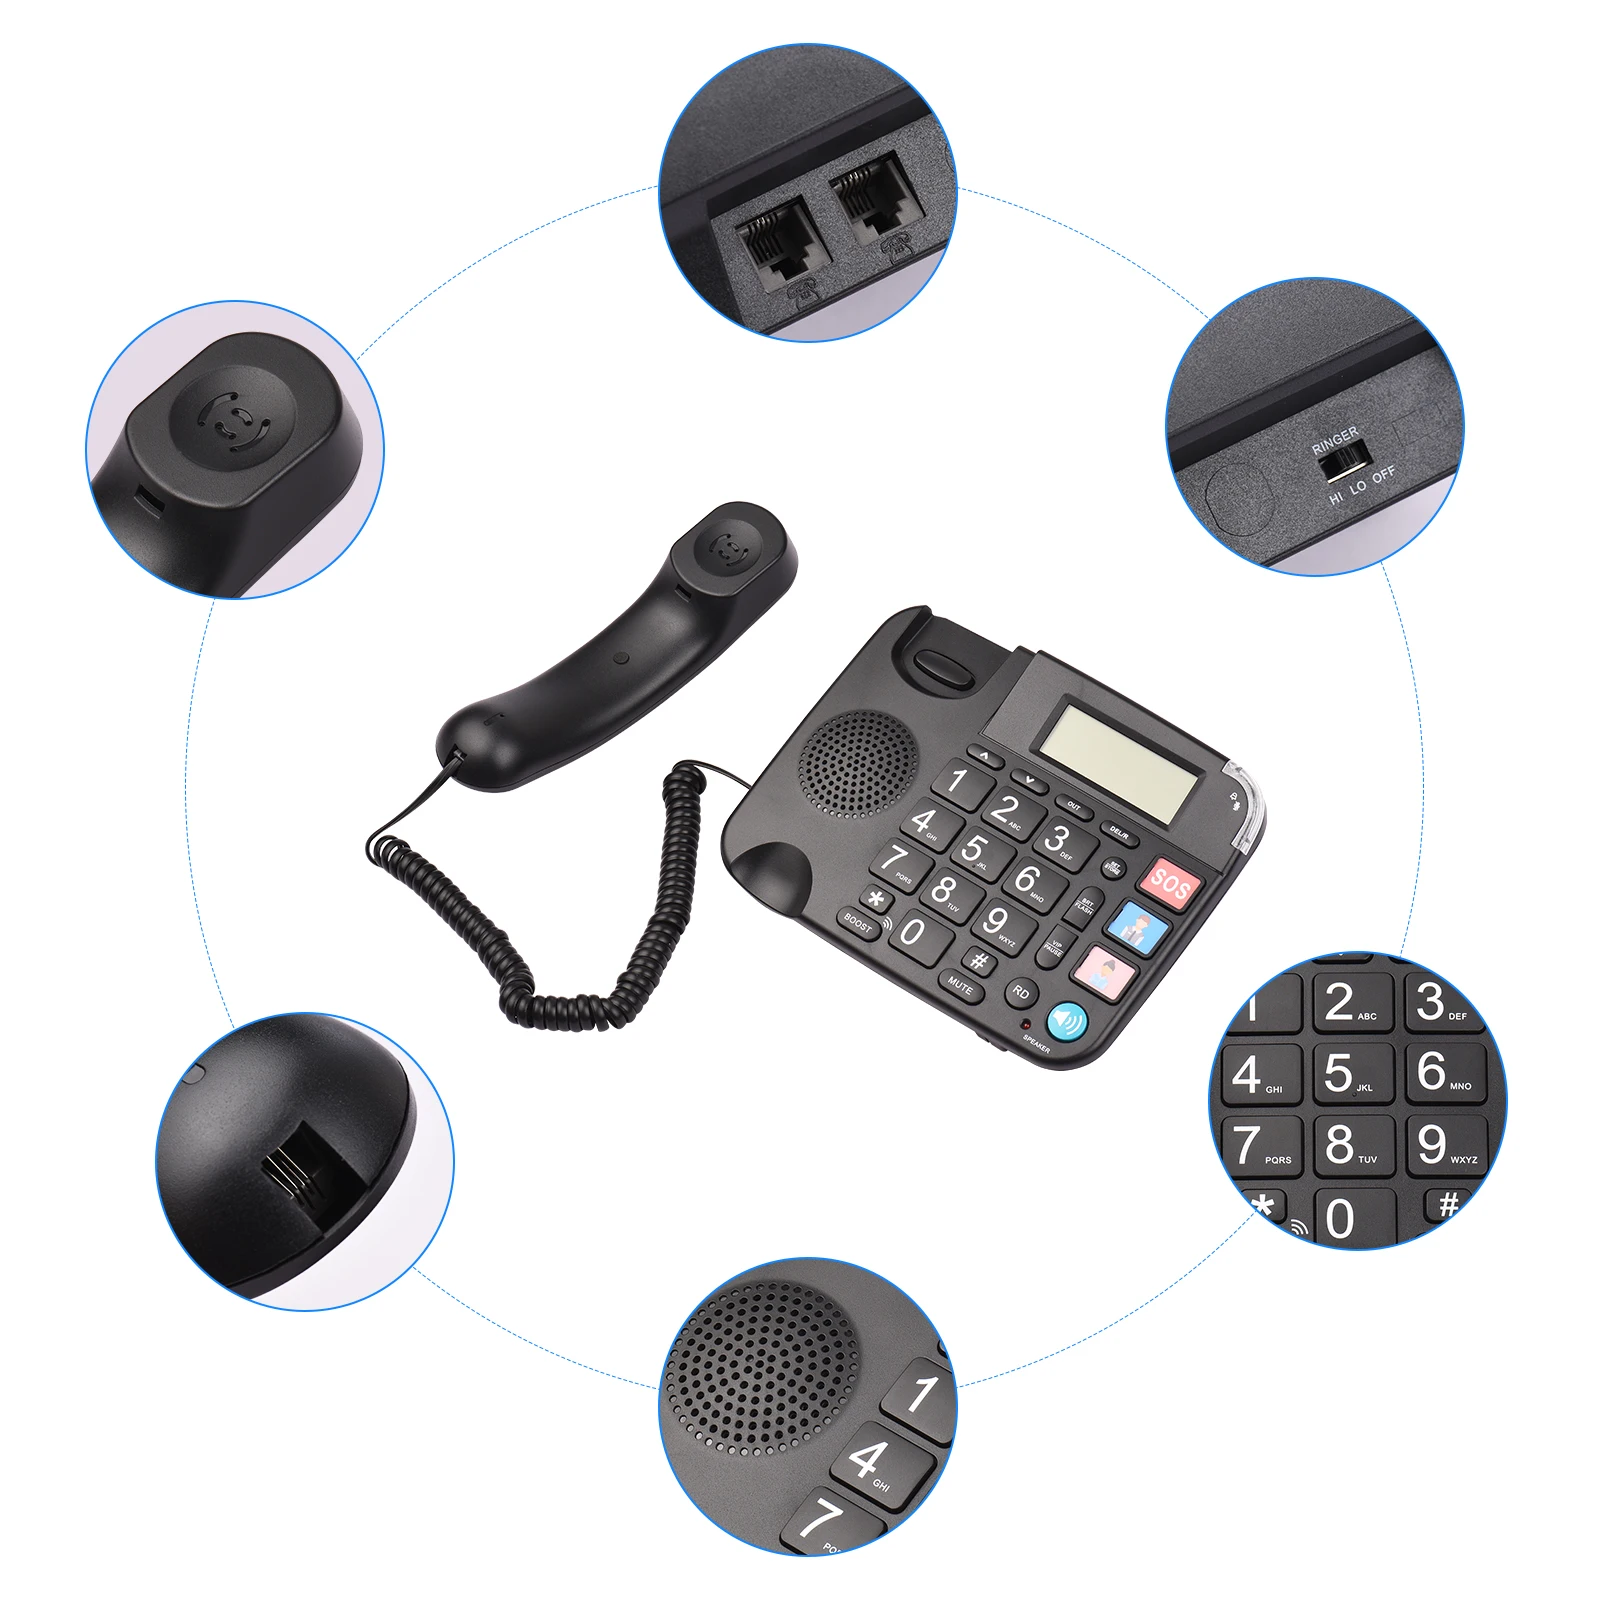 Accessories Black Corded Phone with Big Button Desk Landline Phone Telephone Support HandsFree/Redial/Flash/Speed Dial/Ring Volume Control